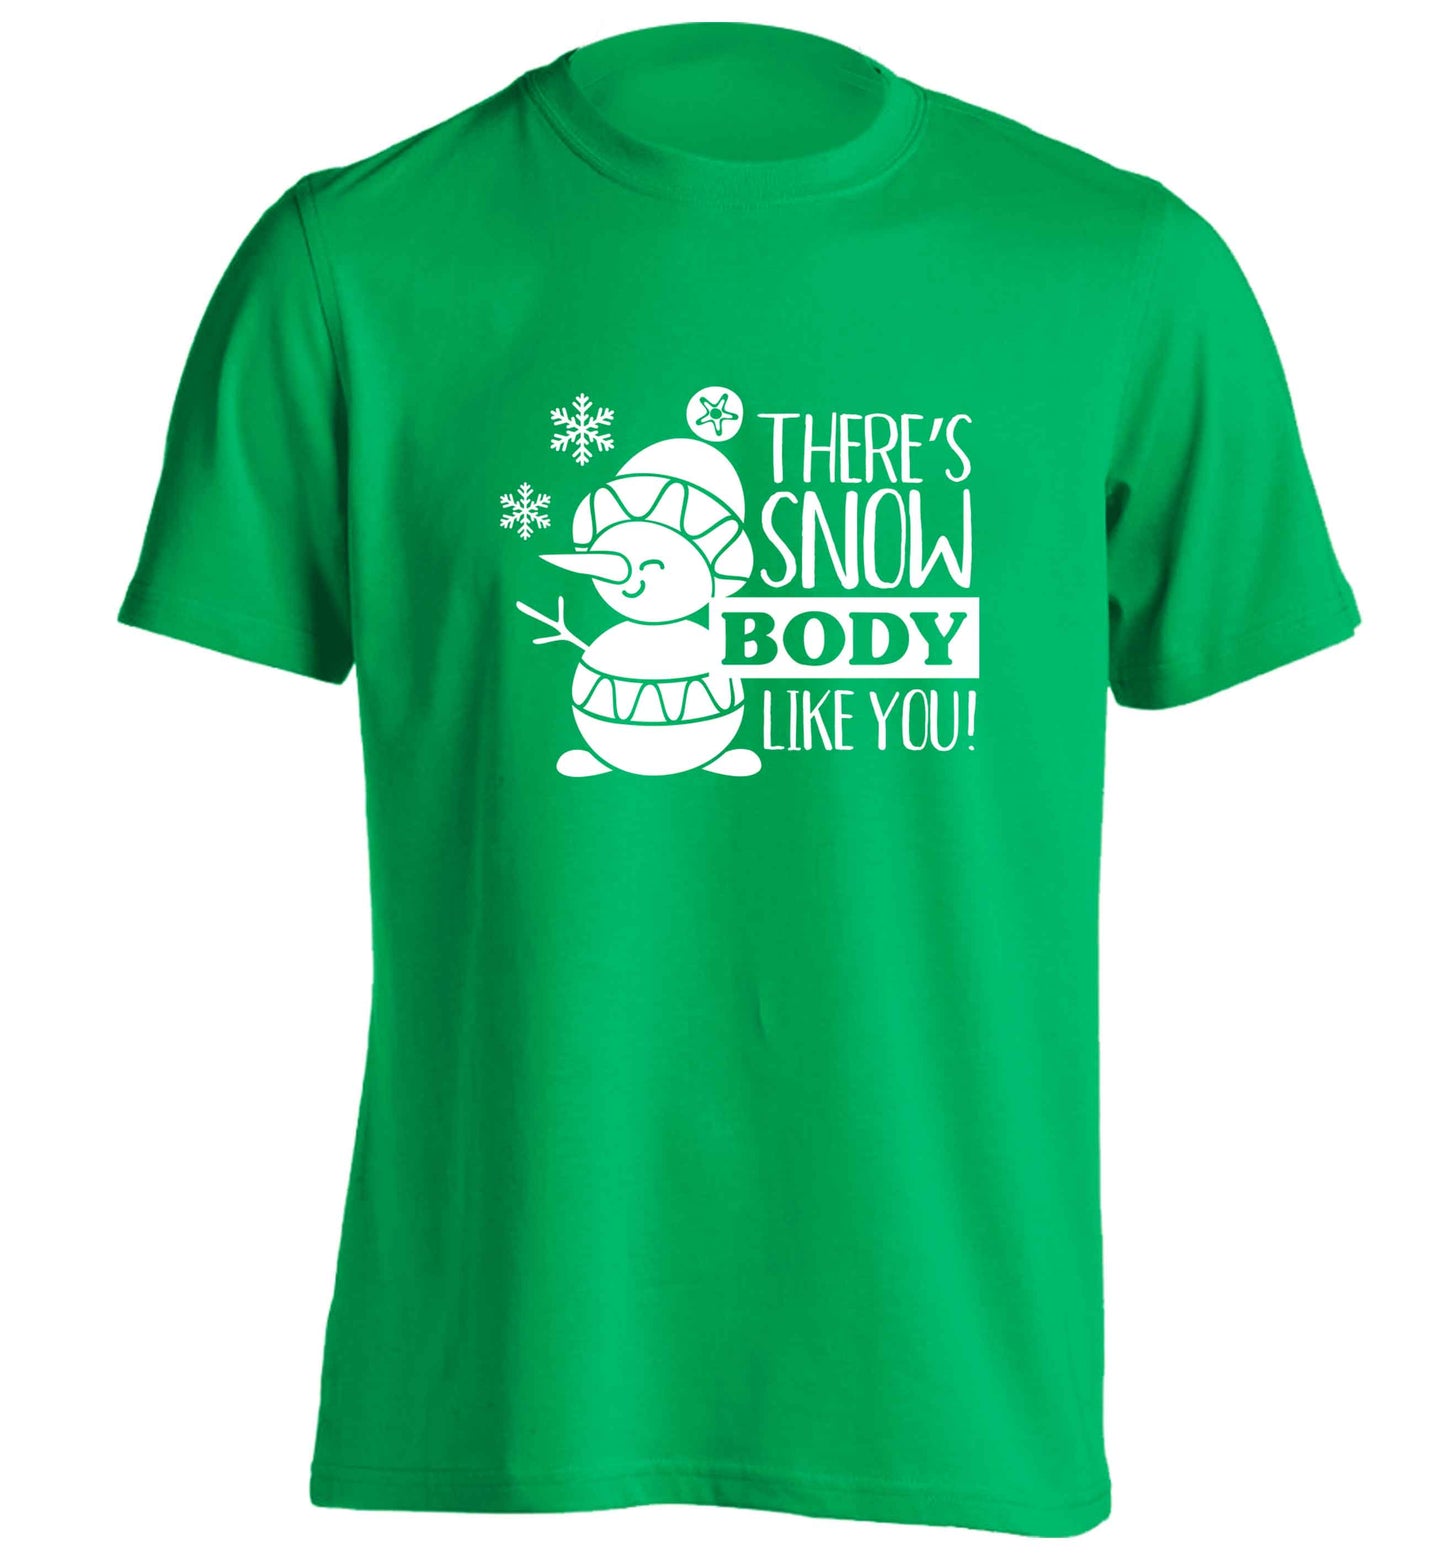 There's snow body like you adults unisex green Tshirt 2XL